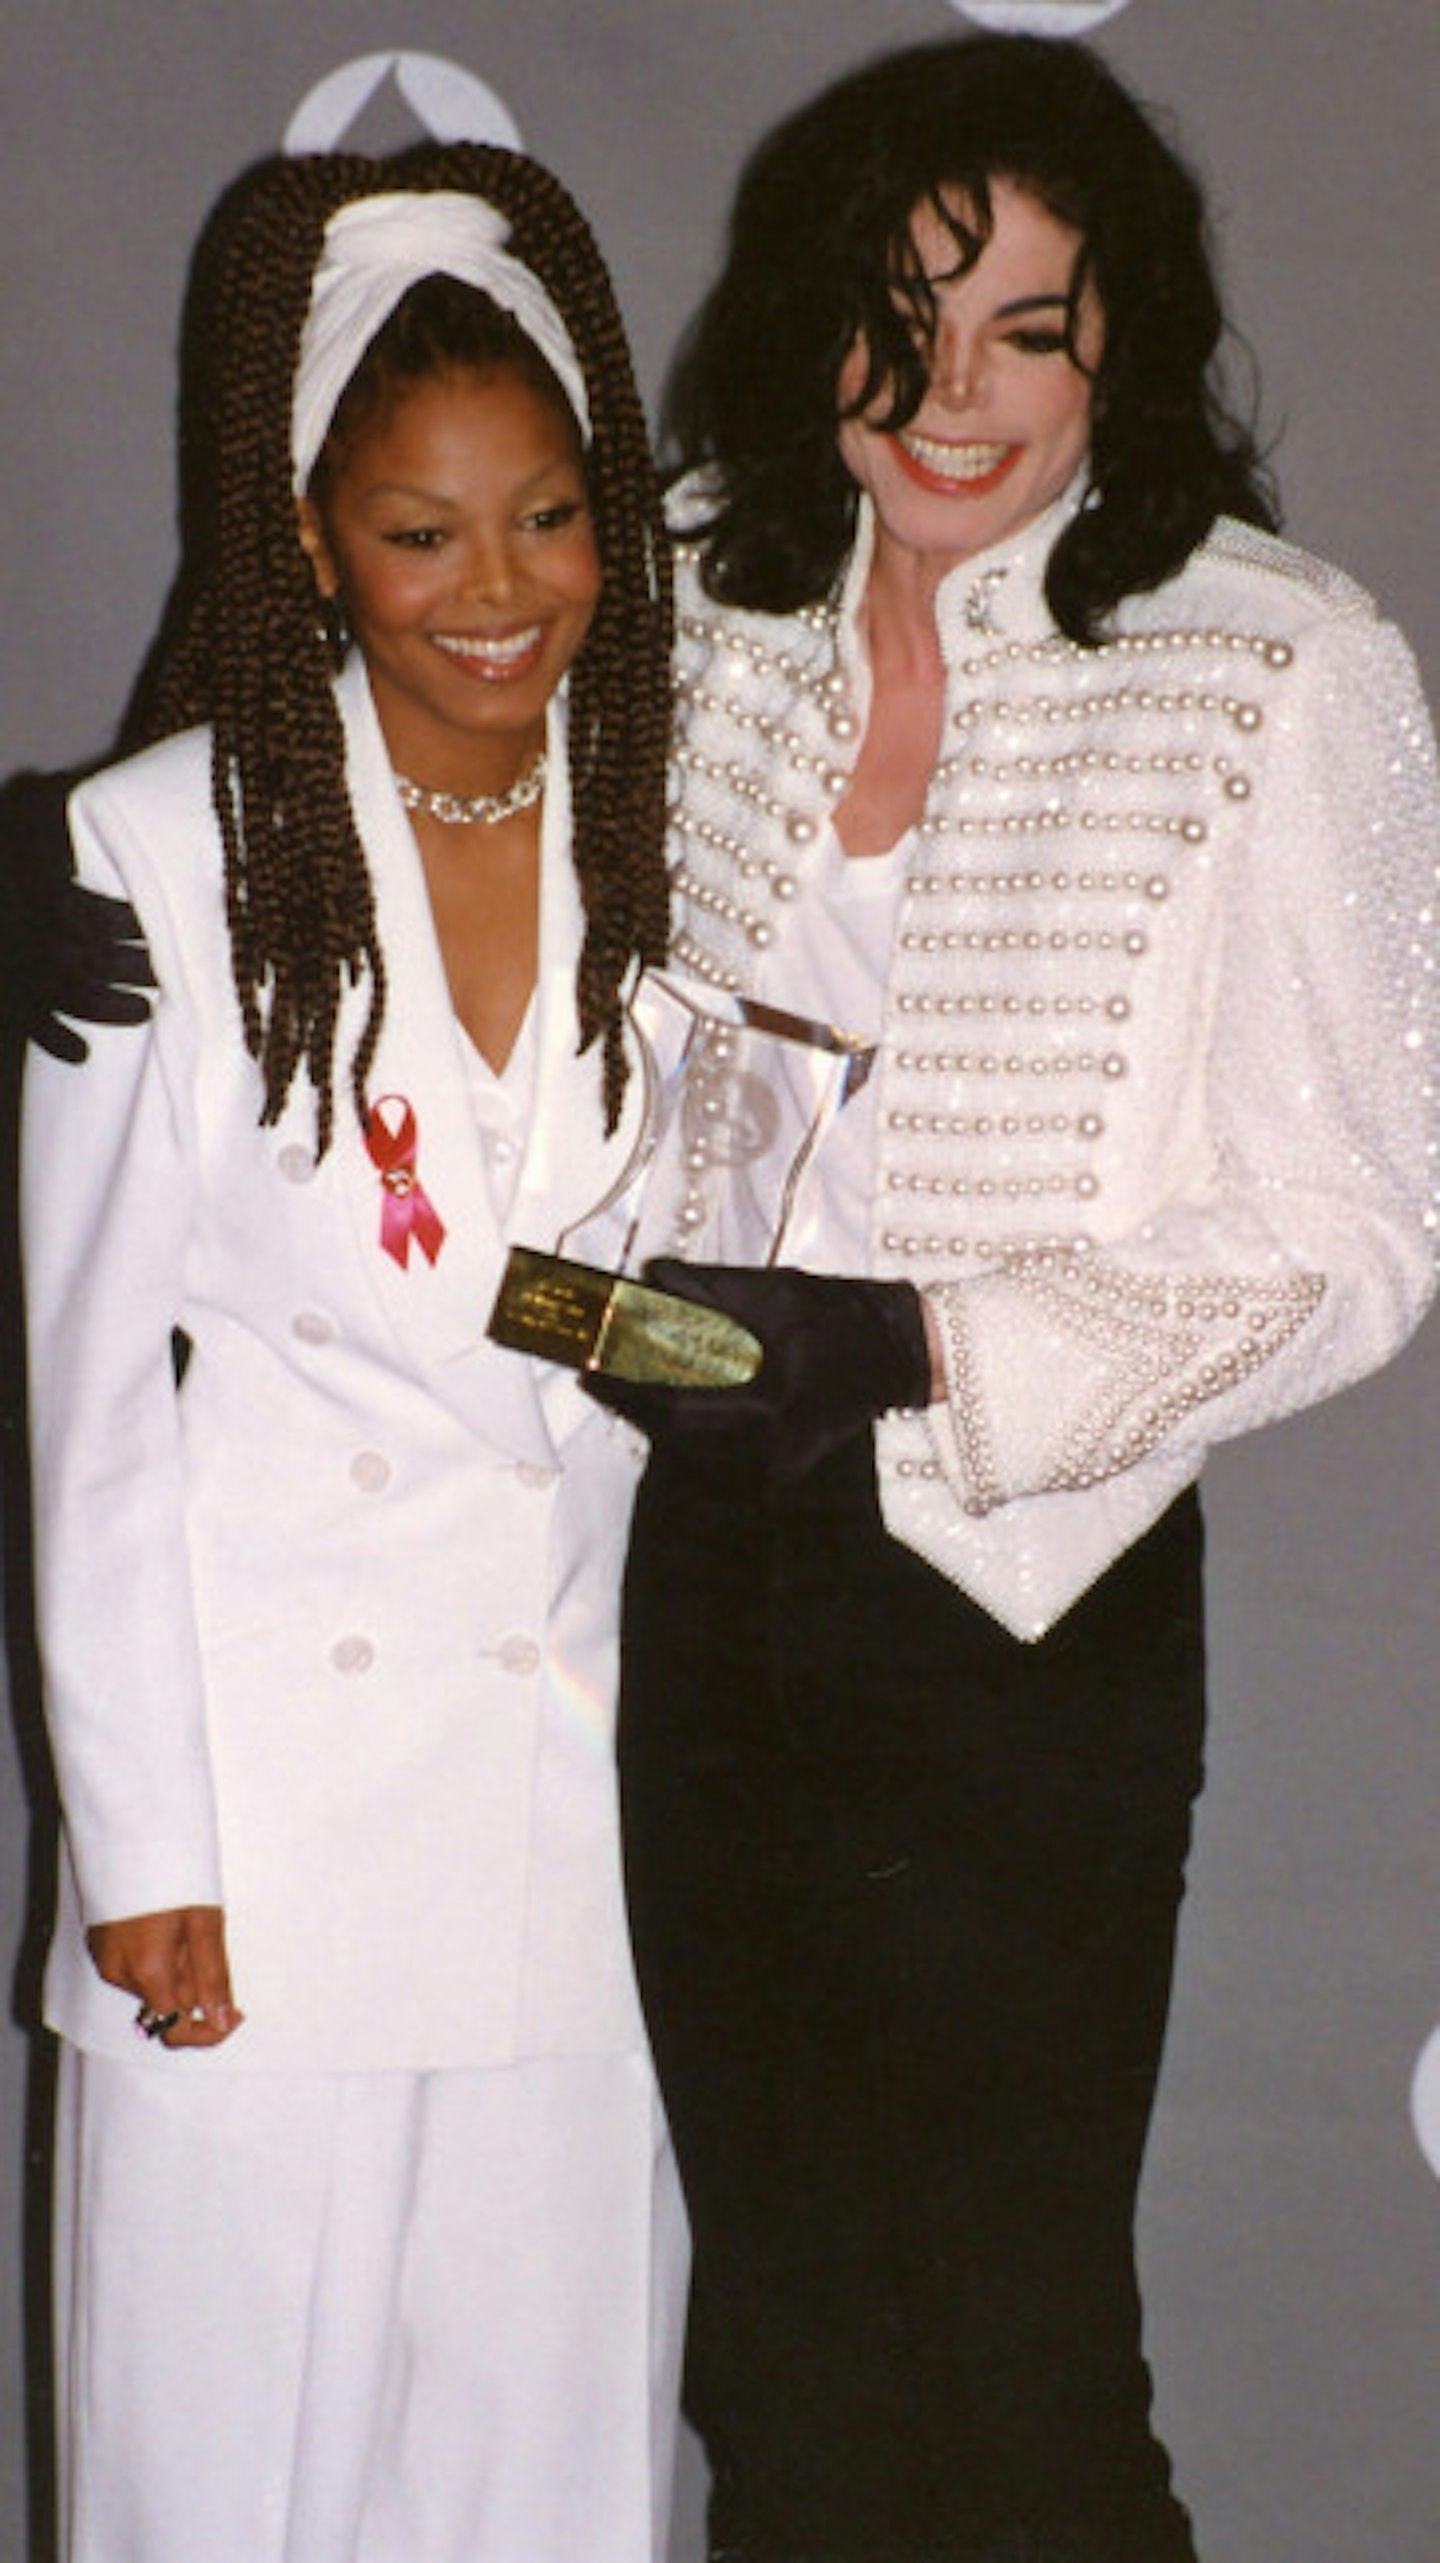 Michael with Janet Jackson